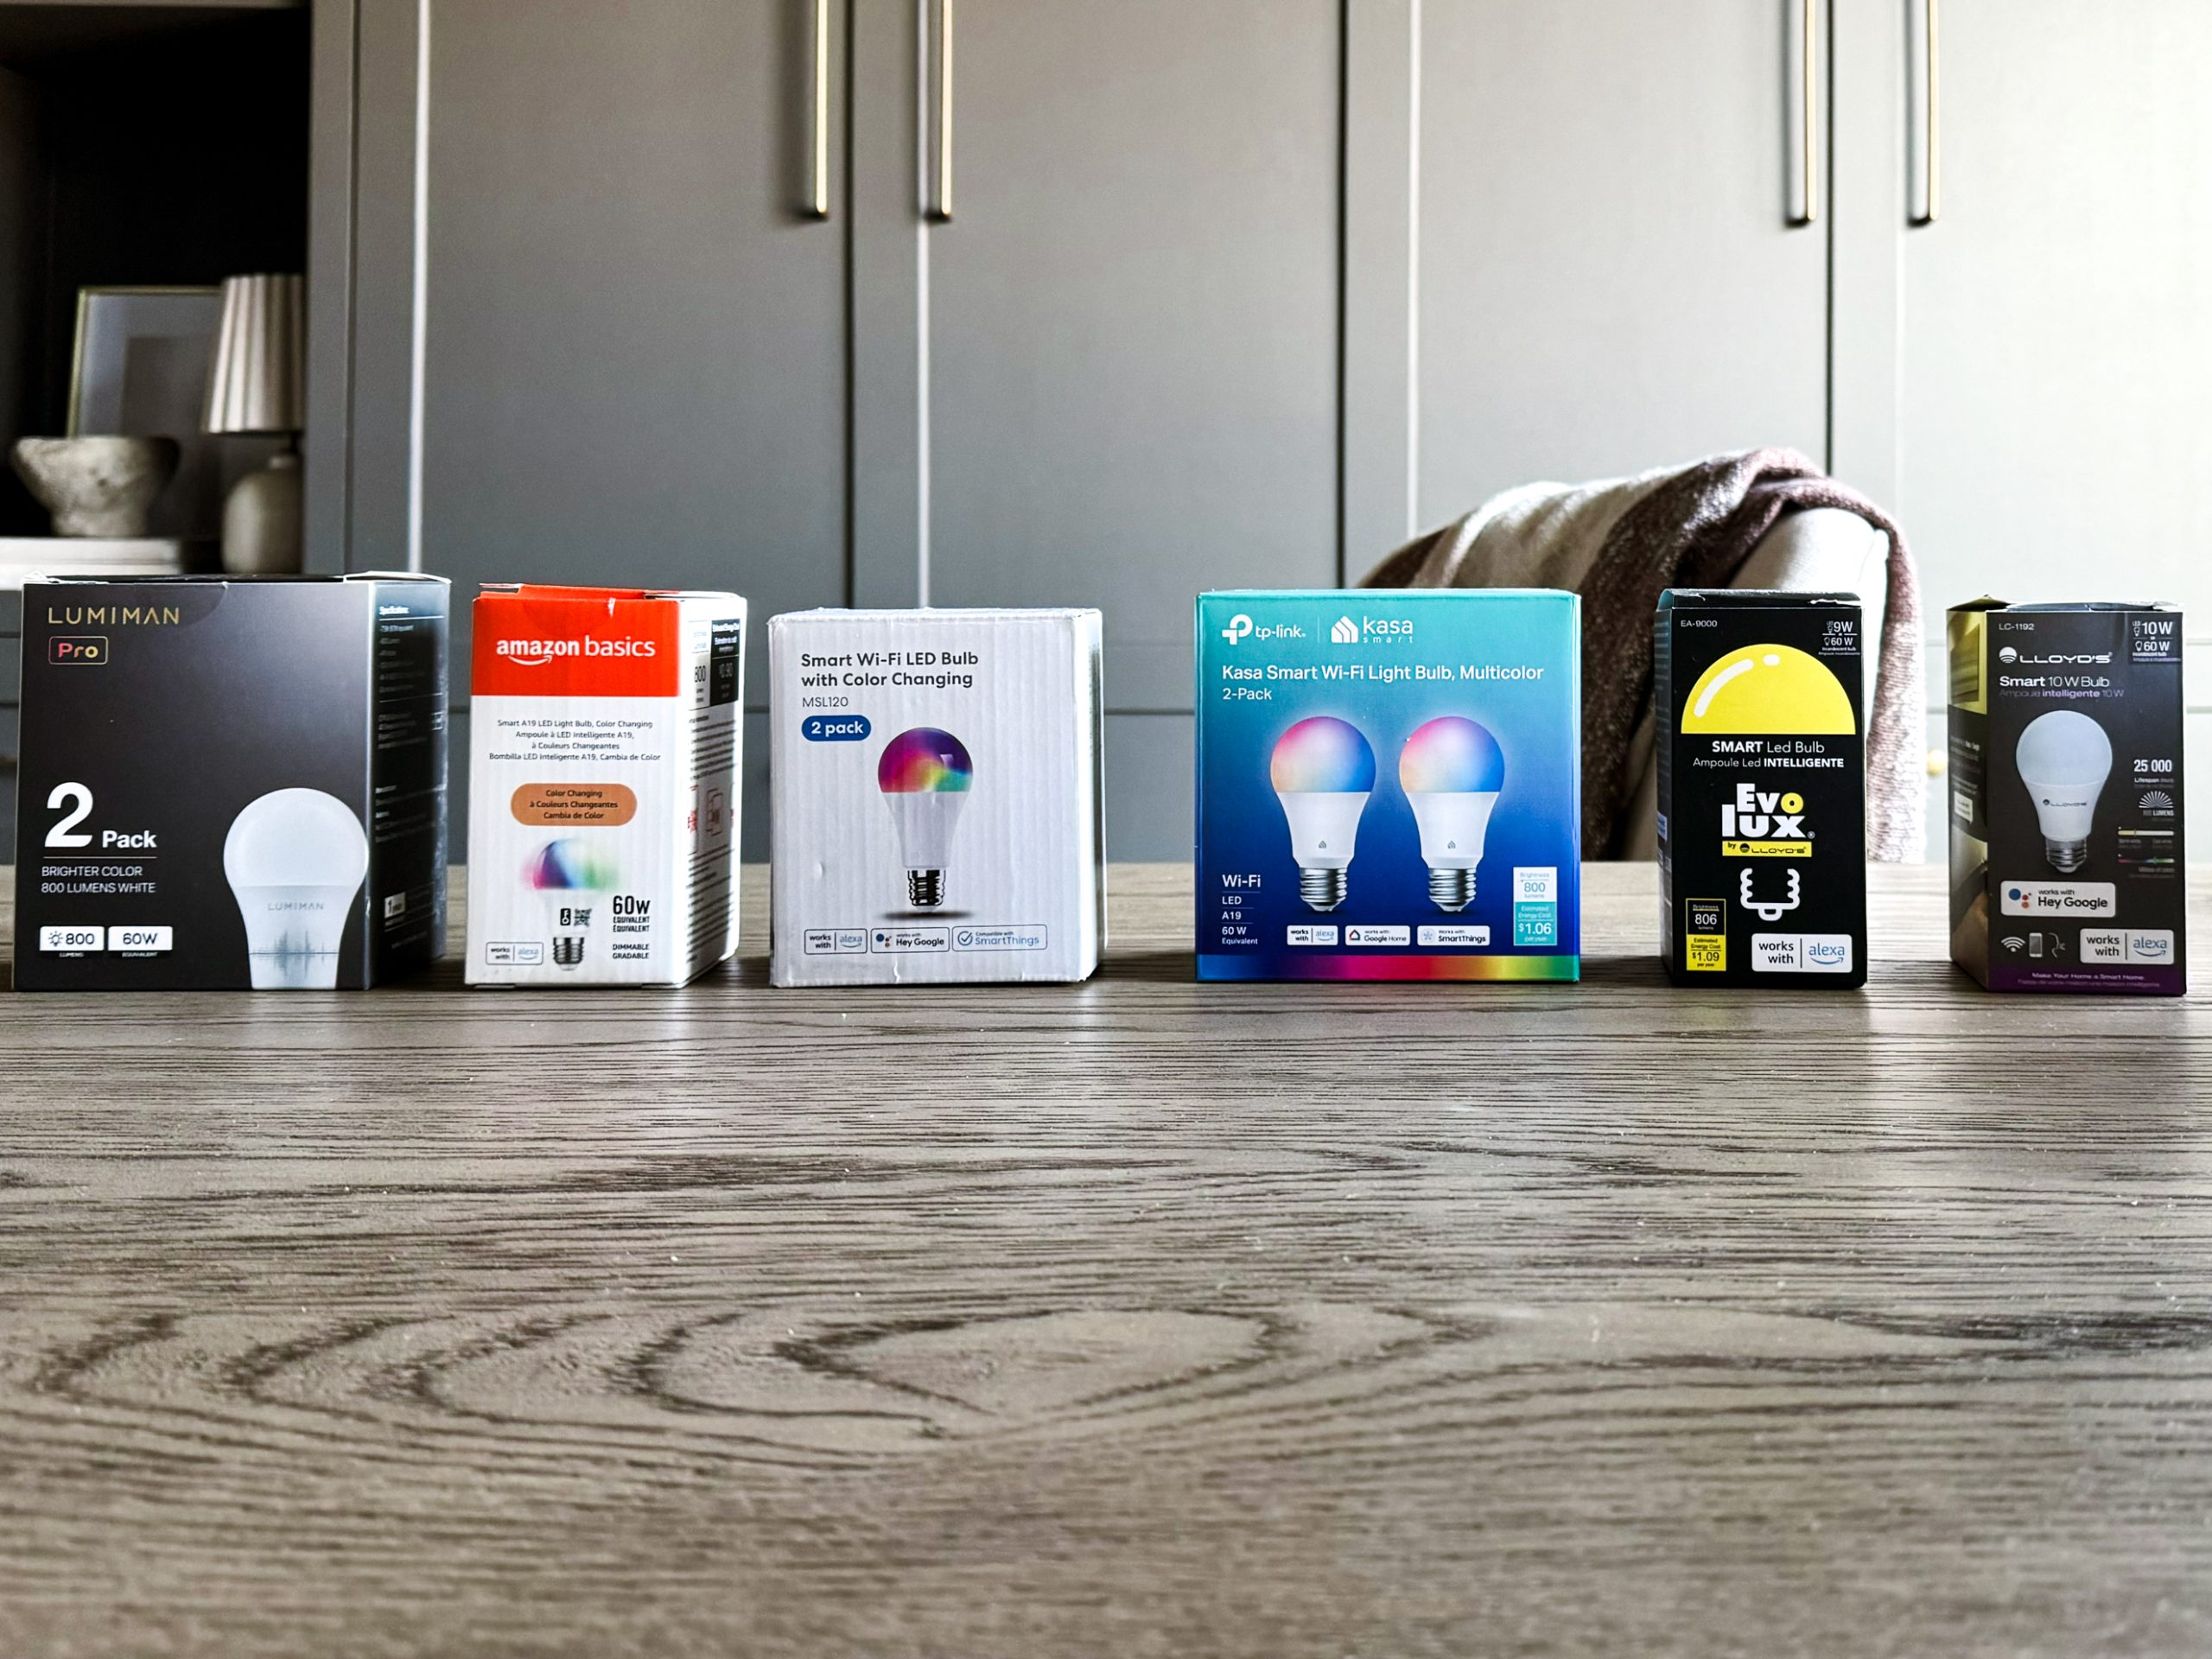 smart light bulb boxes lined up on top of a desk - reviewing them all